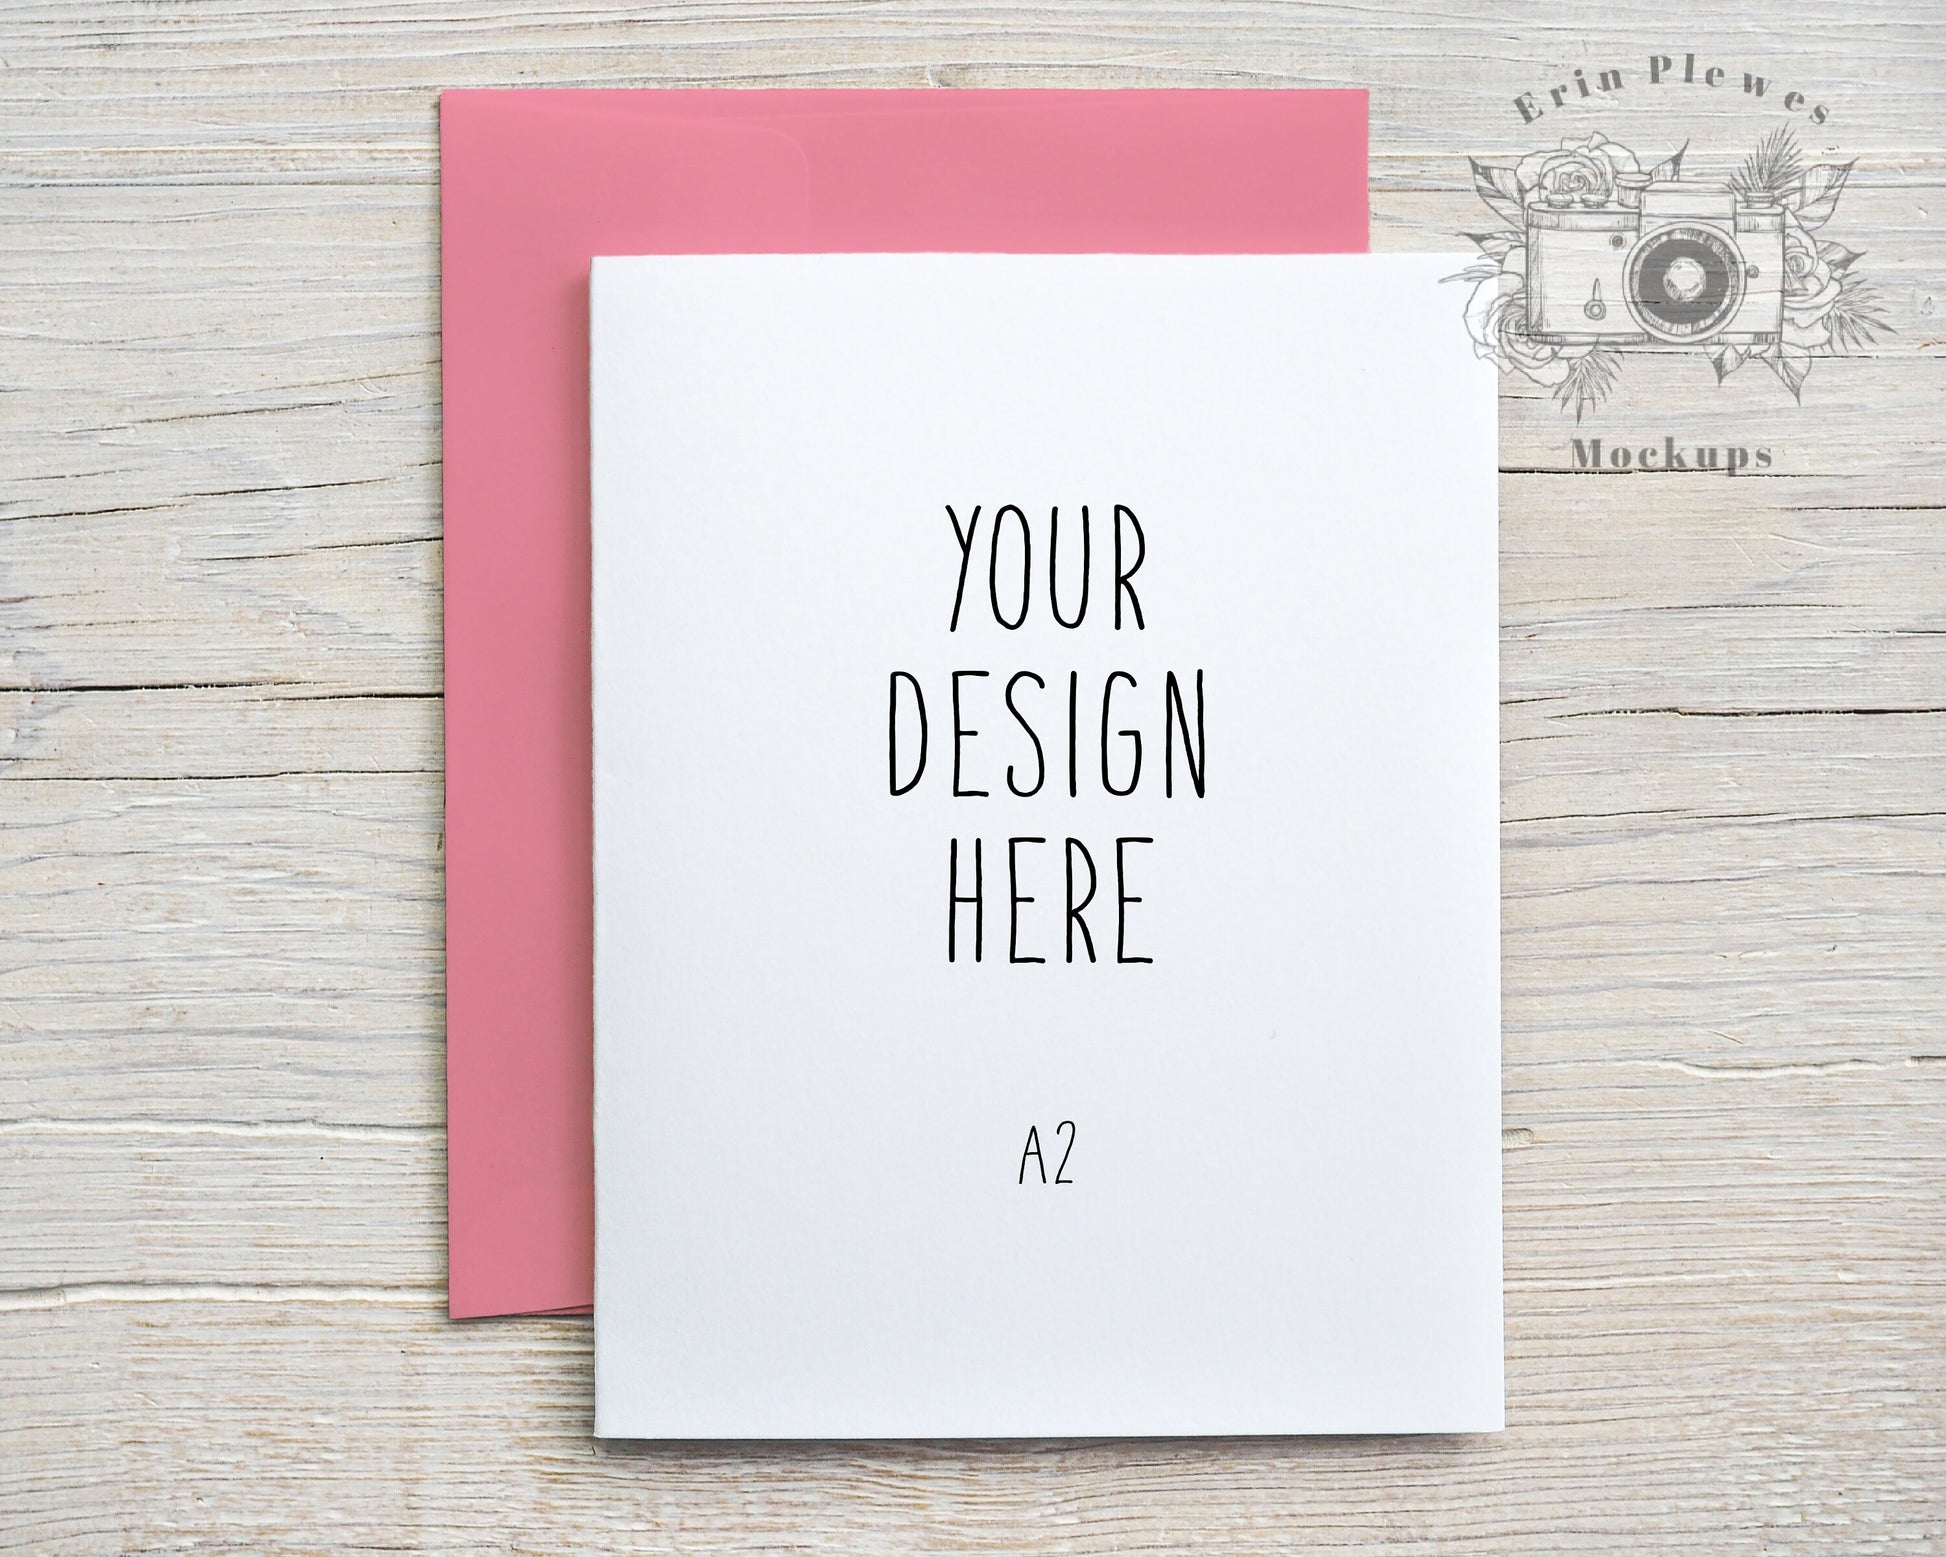 A2 Card Mockup with Pink Envelope, Greeting Card Mock-up for Valentine&#39;s Day, Vertical Card Lifestyle Photo, Jpeg Instant Digital Download